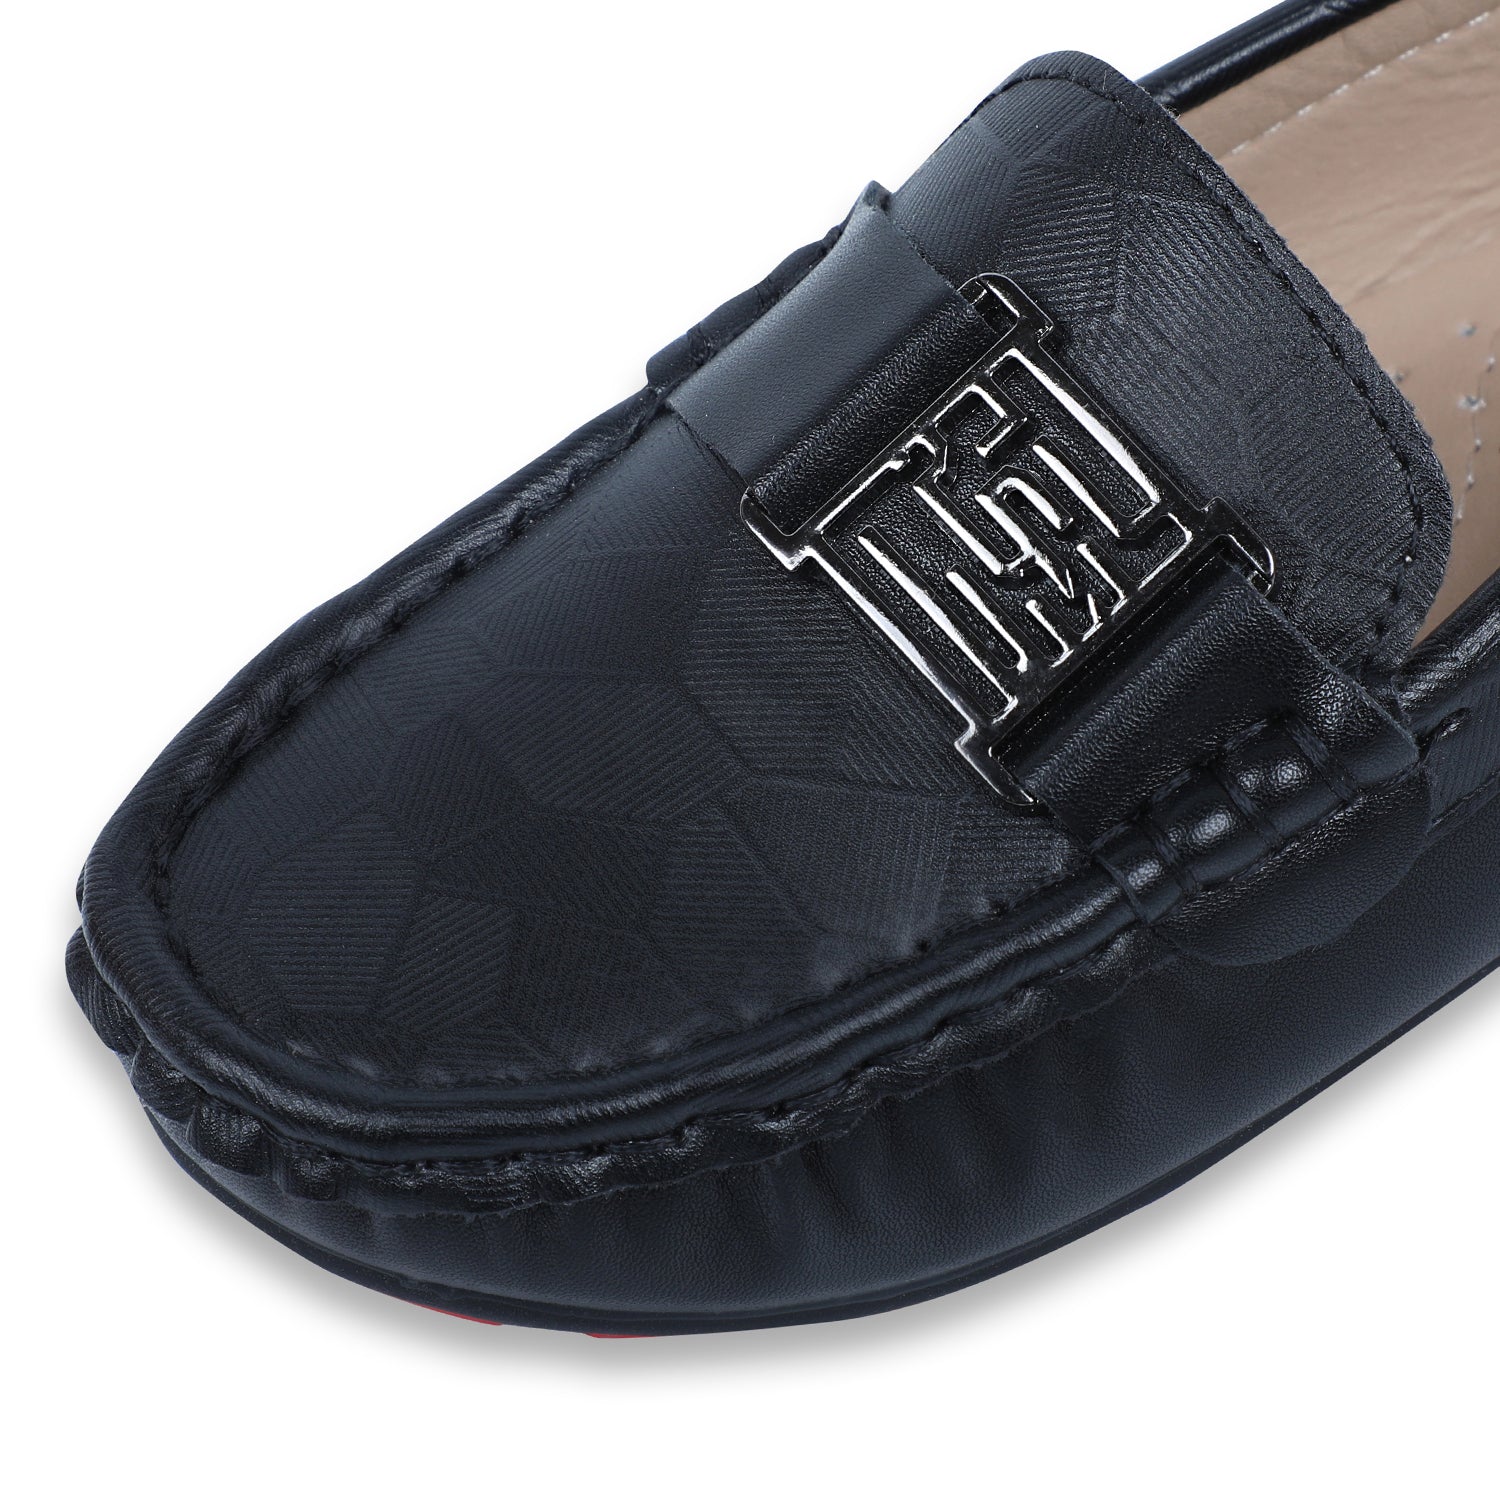 Baby Moo x Bash Kids Textured Leatherite Loafer Shoes - Black